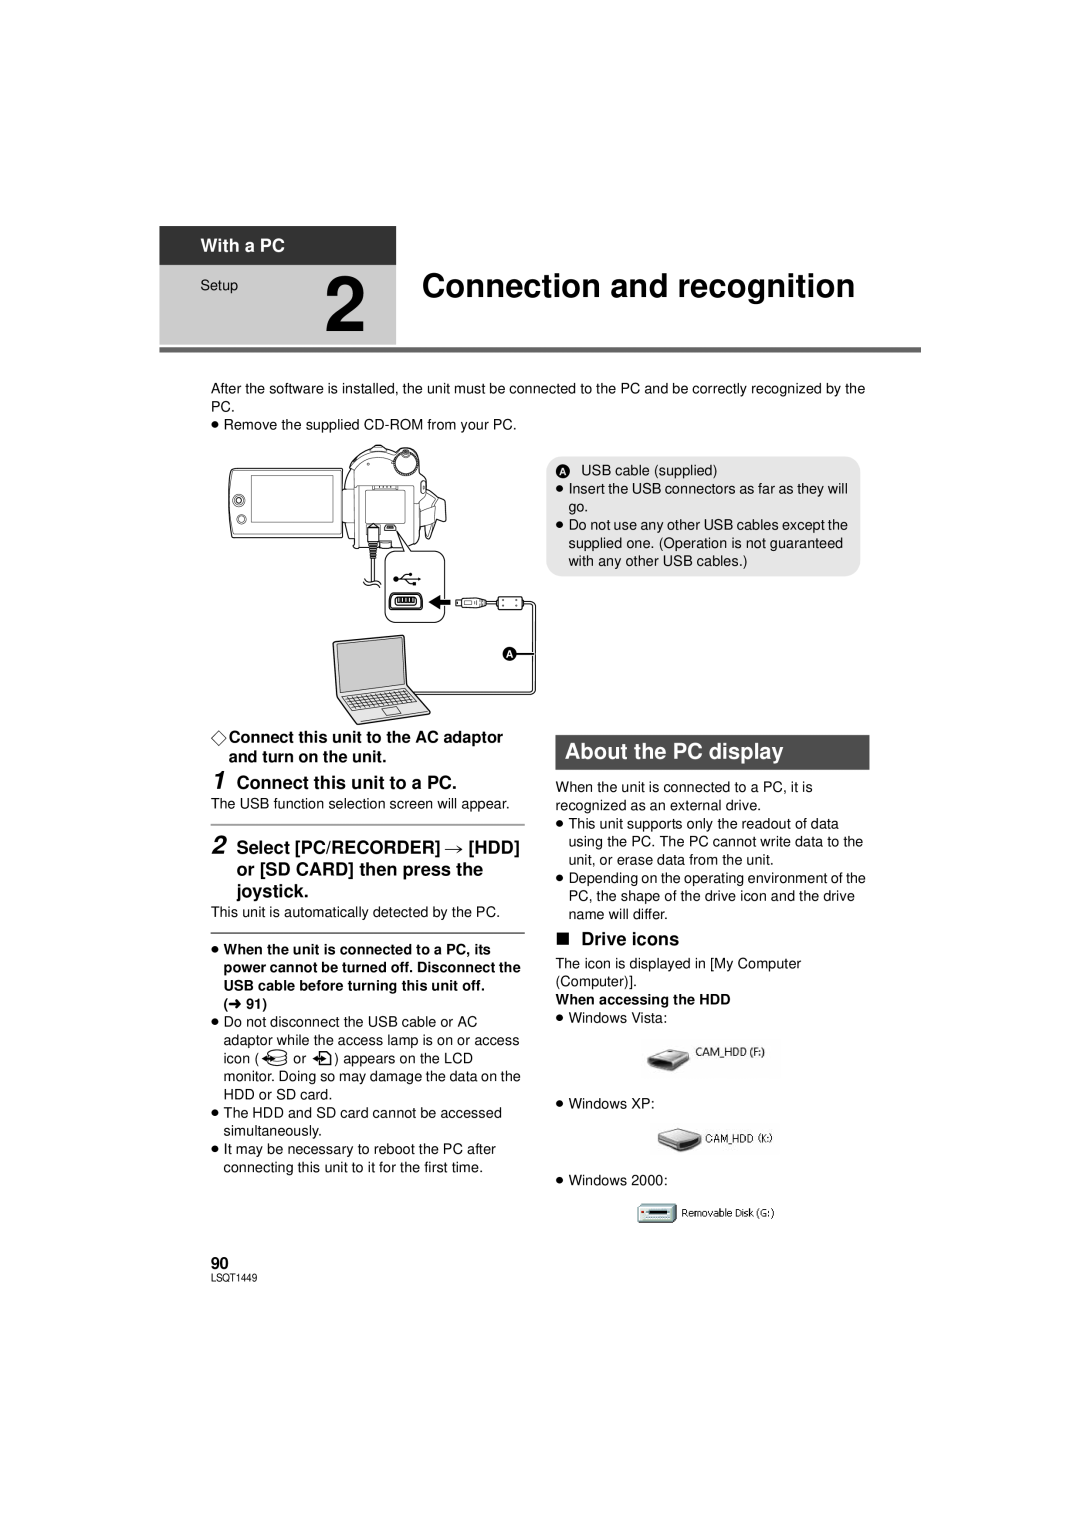 Panasonic SDR-H80P Connection and recognition, About the PC display, Connect this unit to a PC, ∫ Drive icons, With a PC 